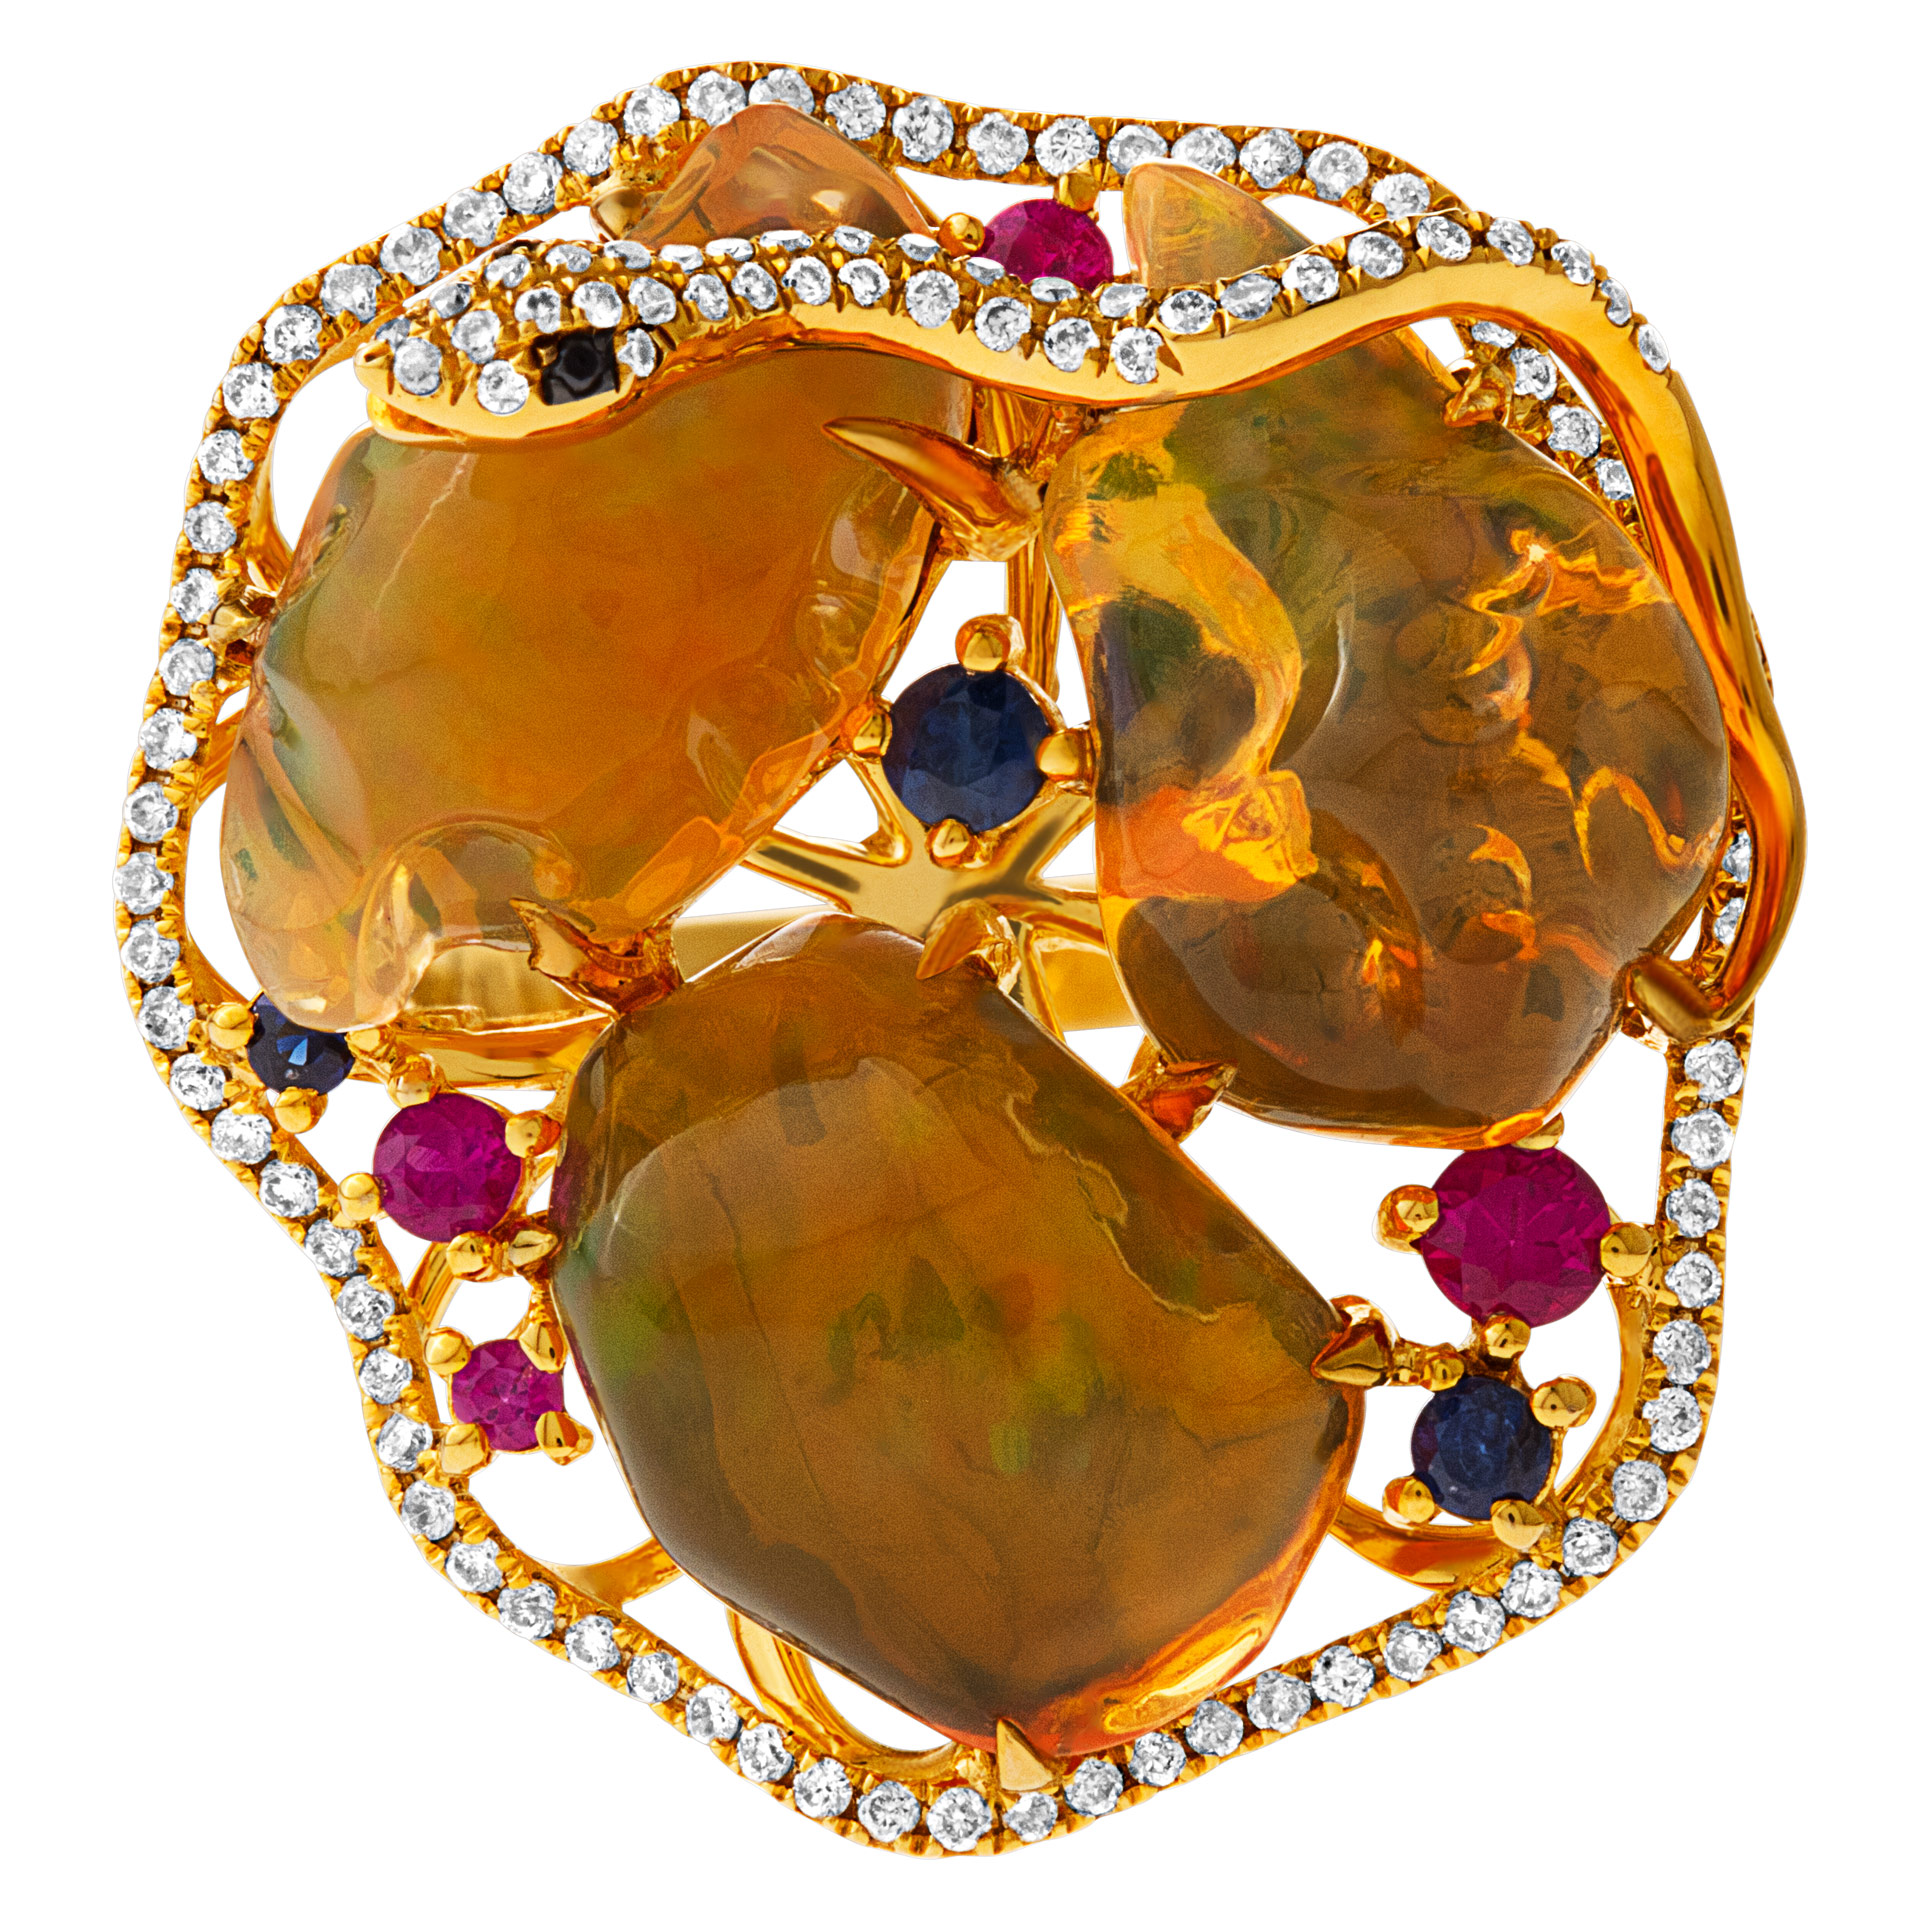 Fire opal ring in 18K yellow gold with diamond accents. 9.8cts in Opal. Size 7